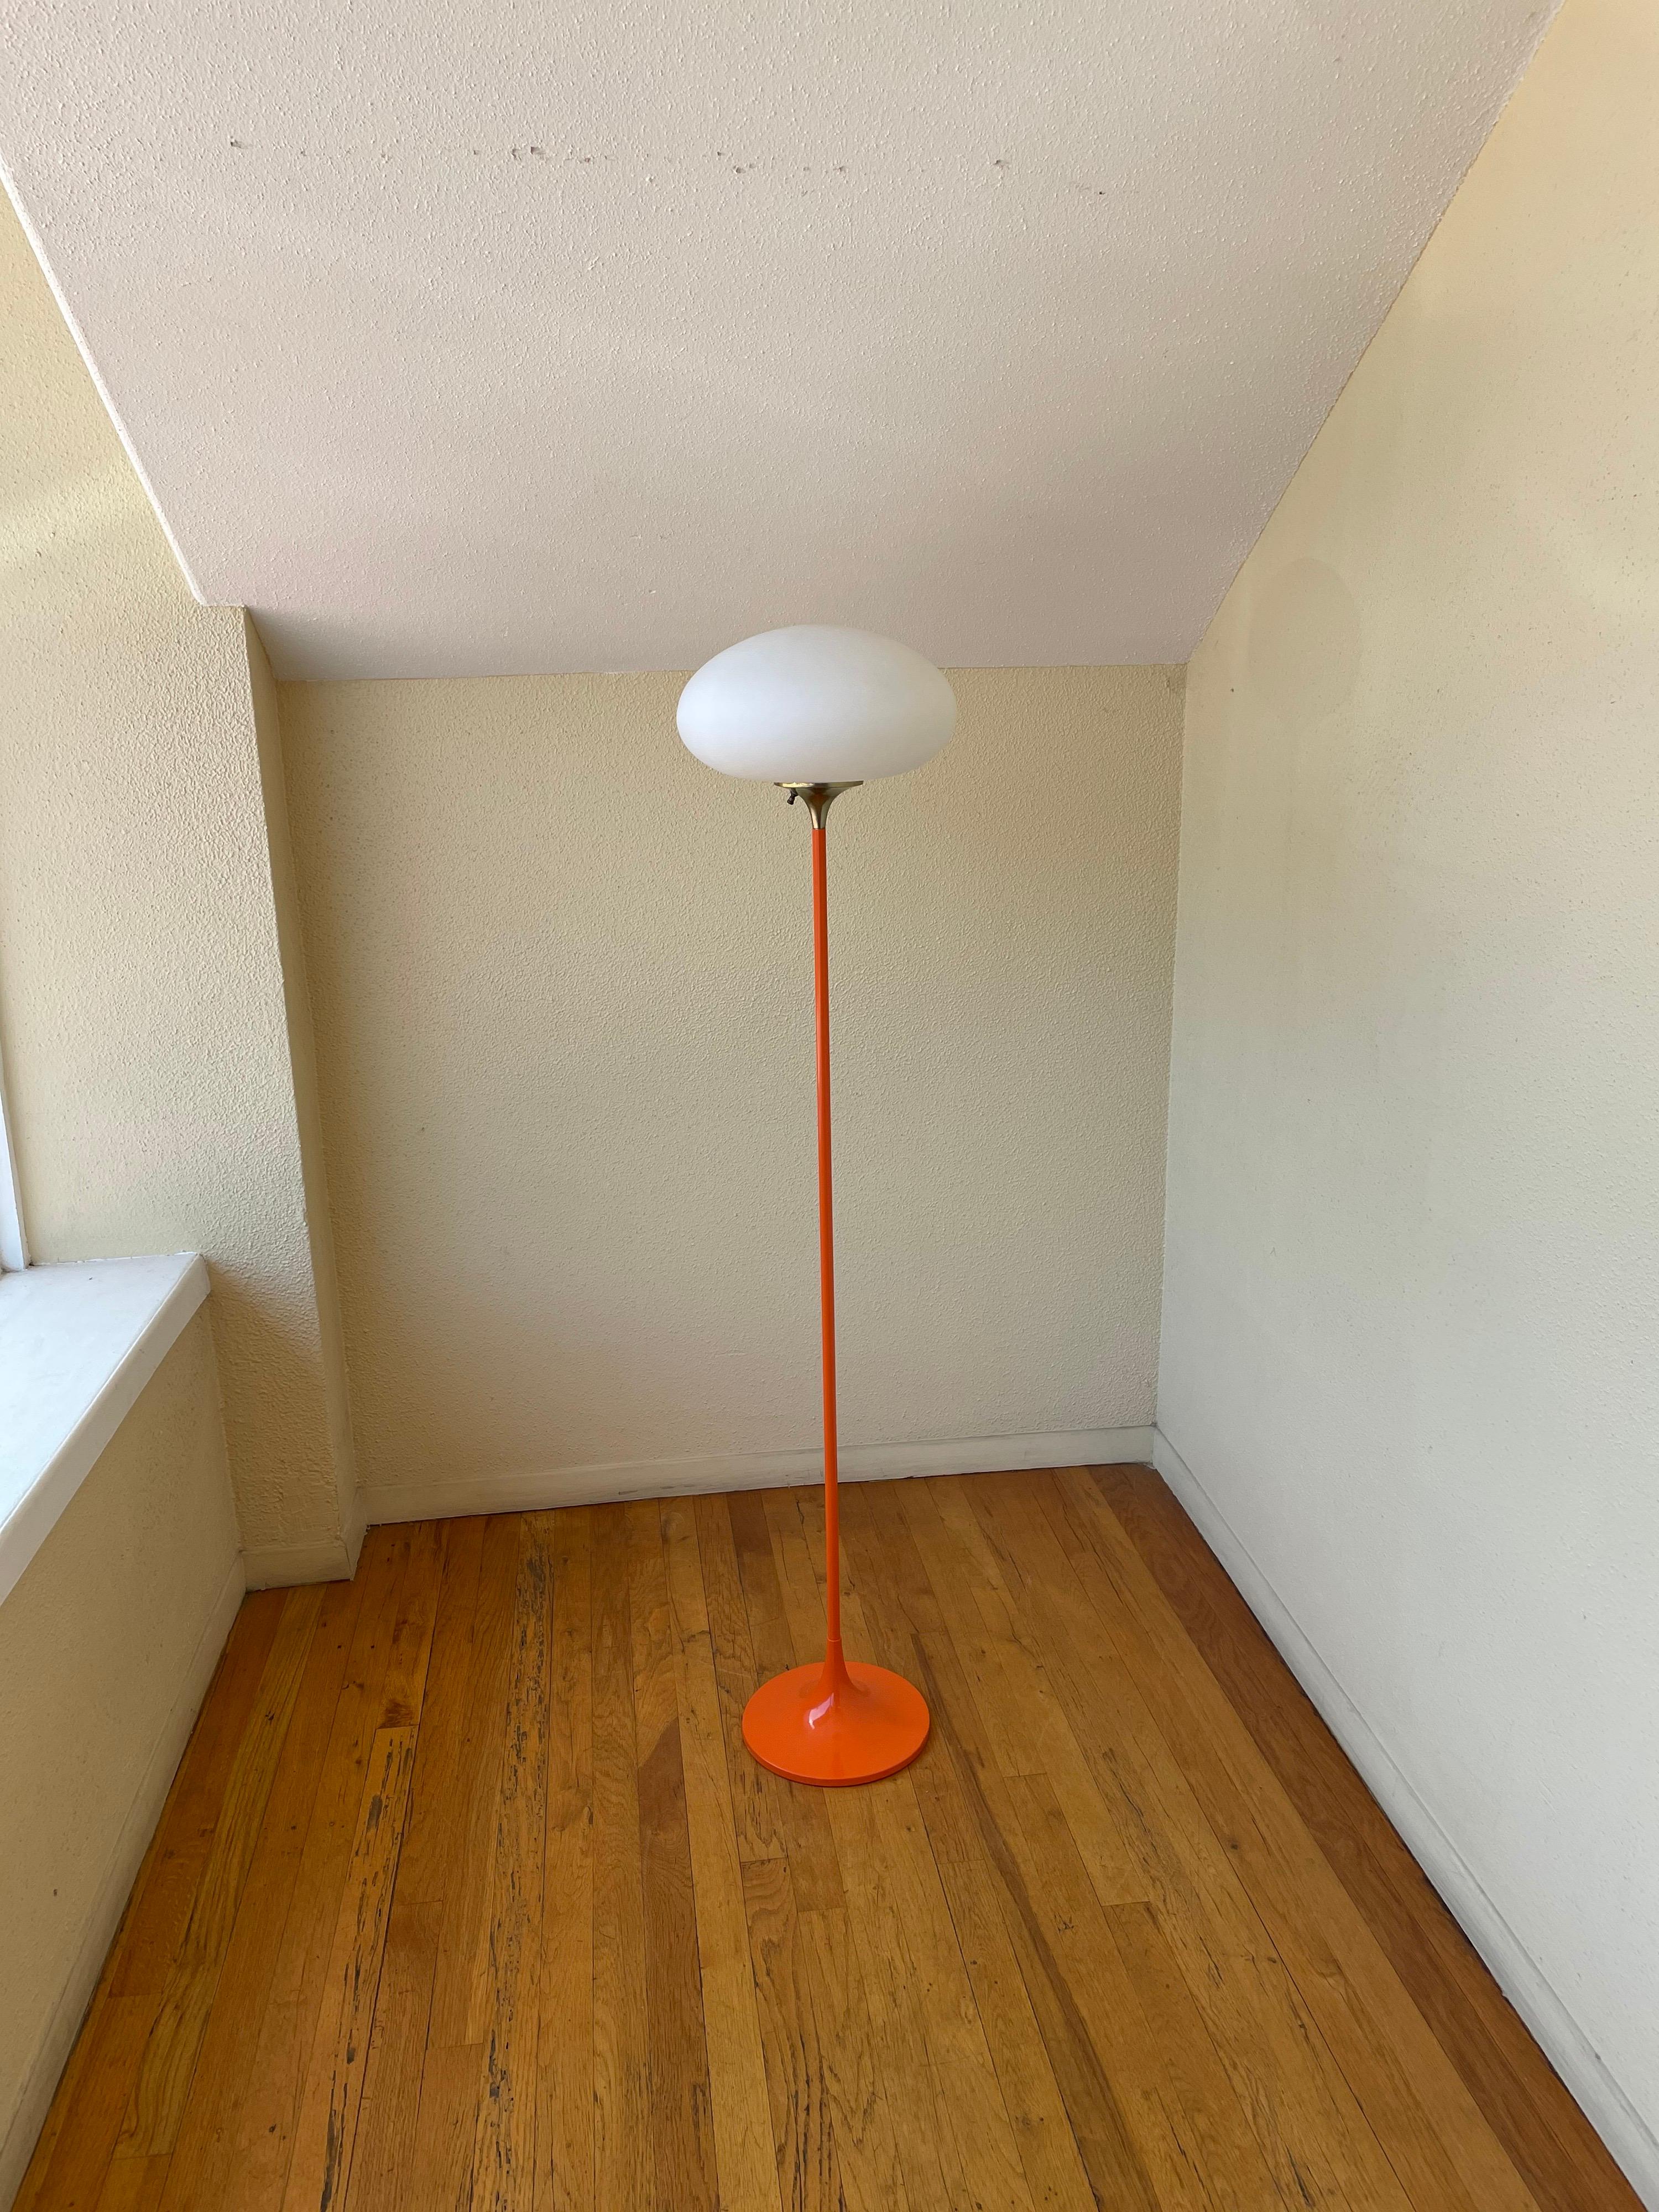 Iconic 1960s mushroom shade floor lamp, designed by Laurel, American, circa 1960s. The lamp its been rewired and sandblasted to an orange color enameled finish we left the top in brass to give an accent piece, some scuffs and marks due to age the